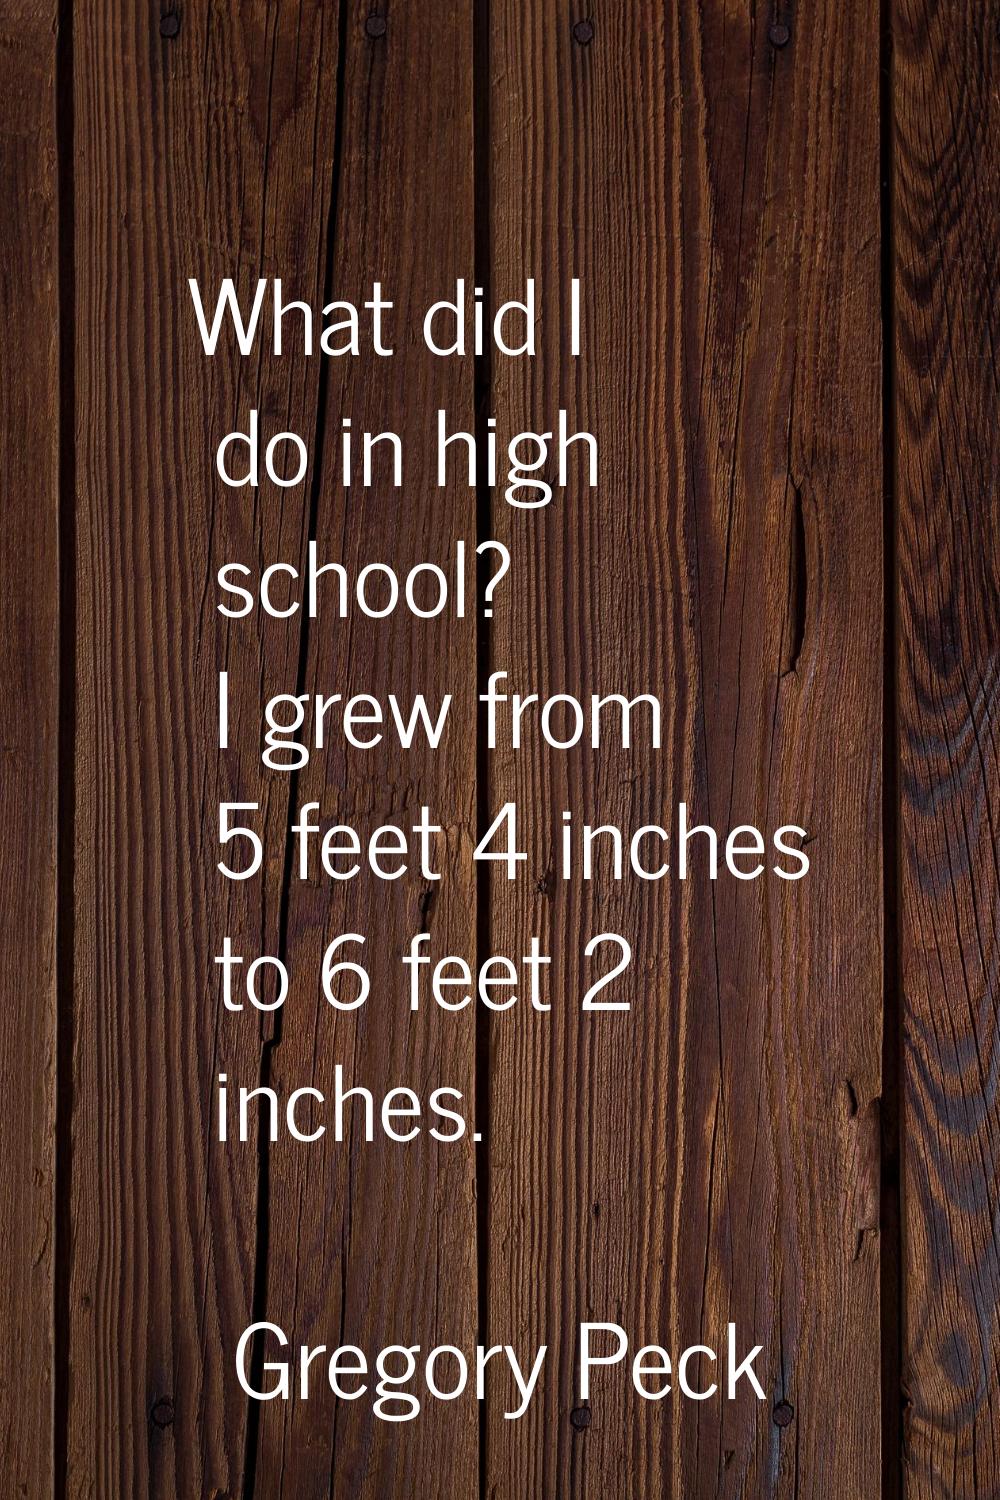 What did I do in high school? I grew from 5 feet 4 inches to 6 feet 2 inches.